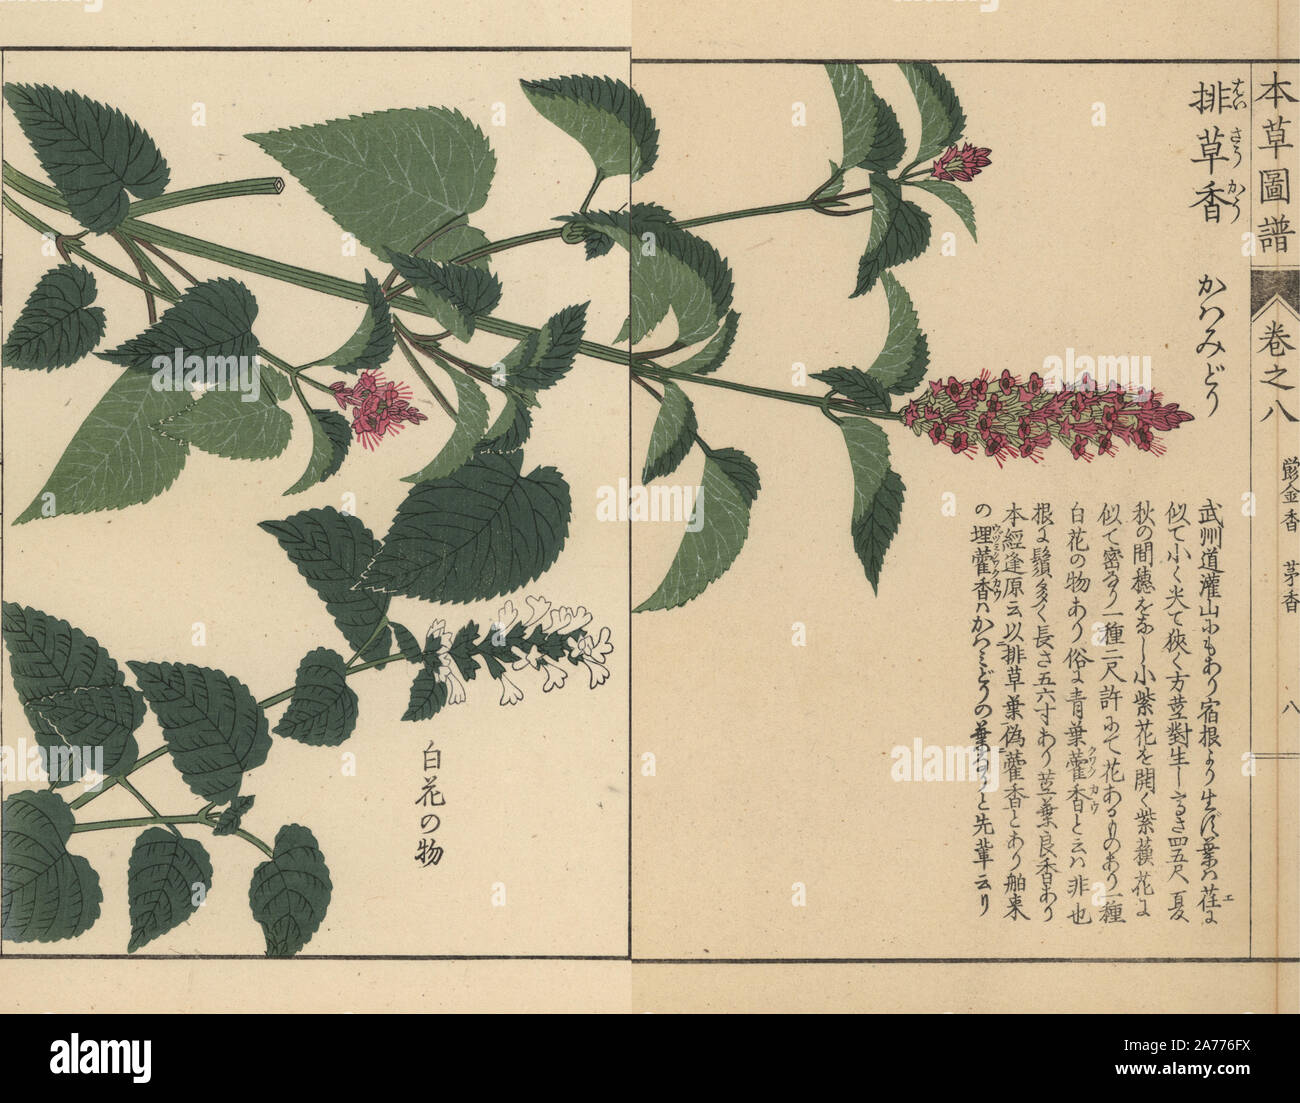 Korean mint, Agastache rugosa (Lophanthus rugosus Fisch.) and anise hyssop, Agastache foeniculum (Lophanthus anisatus). Colour-printed woodblock engraving by Kan'en Iwasaki from 'Honzo Zufu,' an Illustrated Guide to Medicinal Plants, Japan, 1884. Iwasaki (1786-1842) was a Japanese botanist, entomologist and zoologist. He was one of the first Japanese botanists to incorporate western knowledge into his studies. Stock Photo